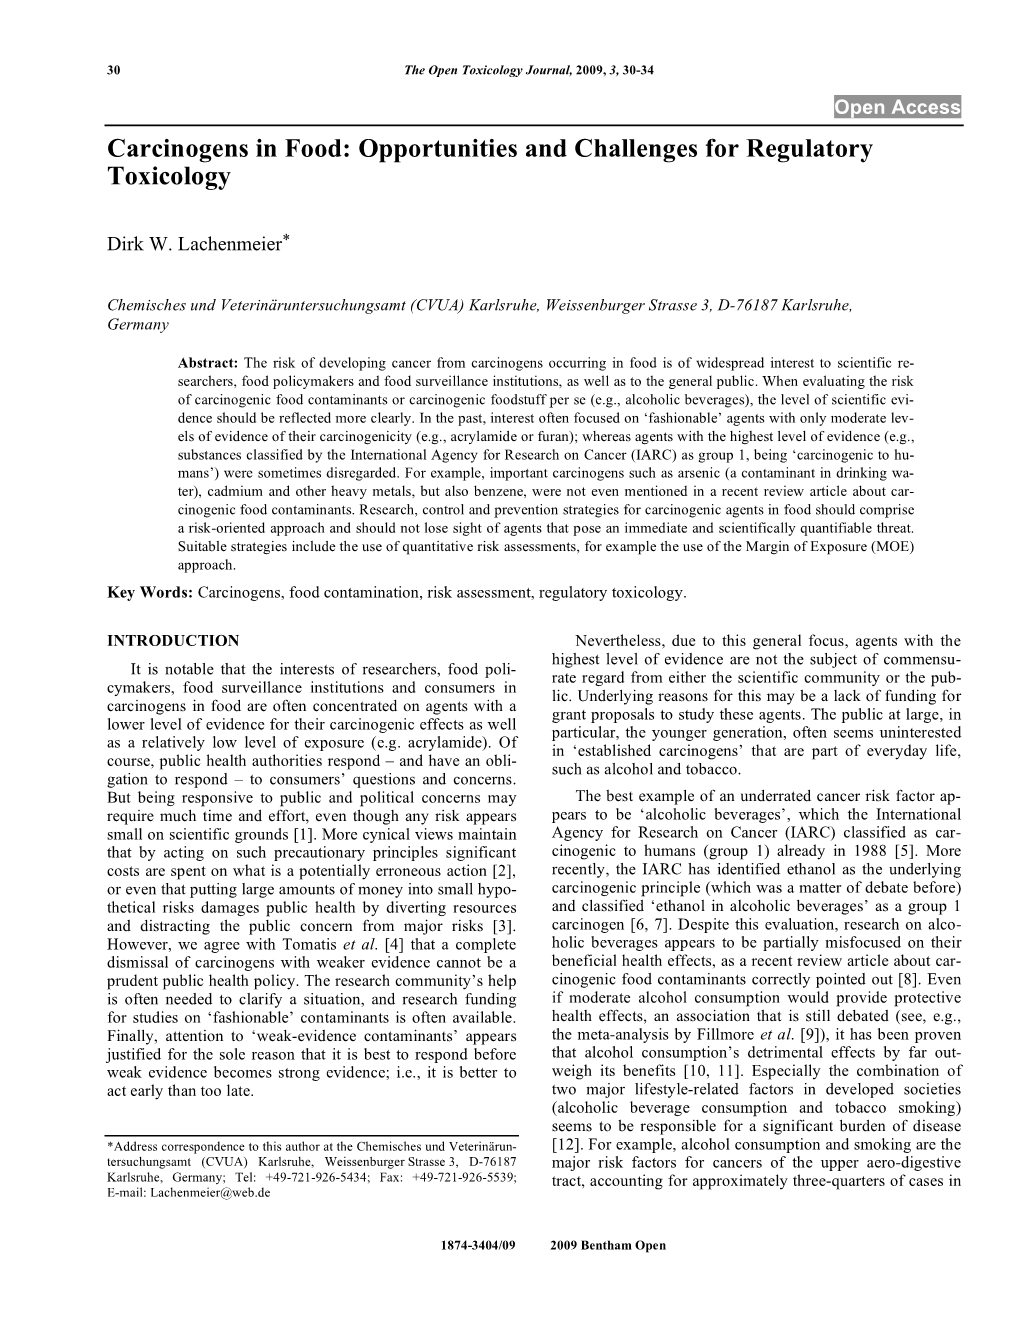 Carcinogens in Food: Opportunities and Challenges for Regulatory Toxicology